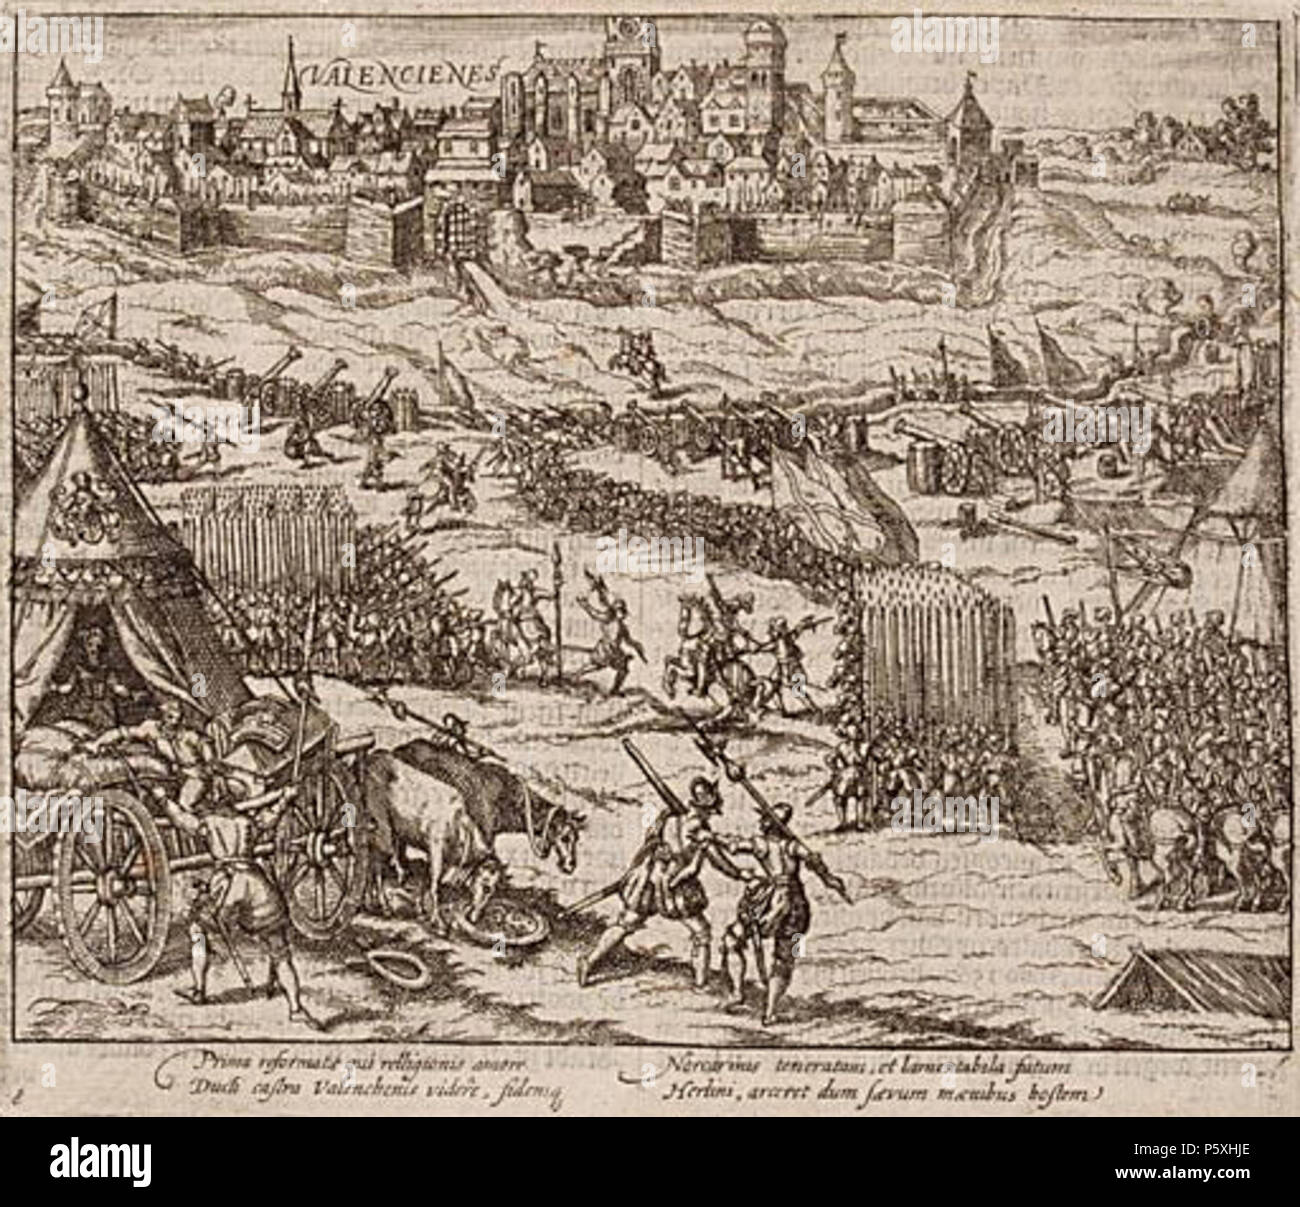 N/A. English: The capture of Valenciennes in 1566/67. 1616.   Frans Hogenberg  (before 1540–1590)    Alternative names Franz Hogenberg, Frans Hogenbergh, Frans Hogenberch  Description Flemish engraver and cartographer  Date of birth/death before 1540 1590  Location of birth/death Mechelen Cologne  Work period 1568-1588  Work location Antwerp (1568), London (1568), Cologne (1570-1585), Hamburg (1585-1588), Denmark (1588)  Authority control  : Q959748 VIAF:100197099 ISNI:0000 0001 1839 1431 ULAN:500000956 LCCN:n50043890 WGA:HOGENBERG, Frans WorldCat 270 Capture of Valenciennes in 1566-67 (Frans  Stock Photo